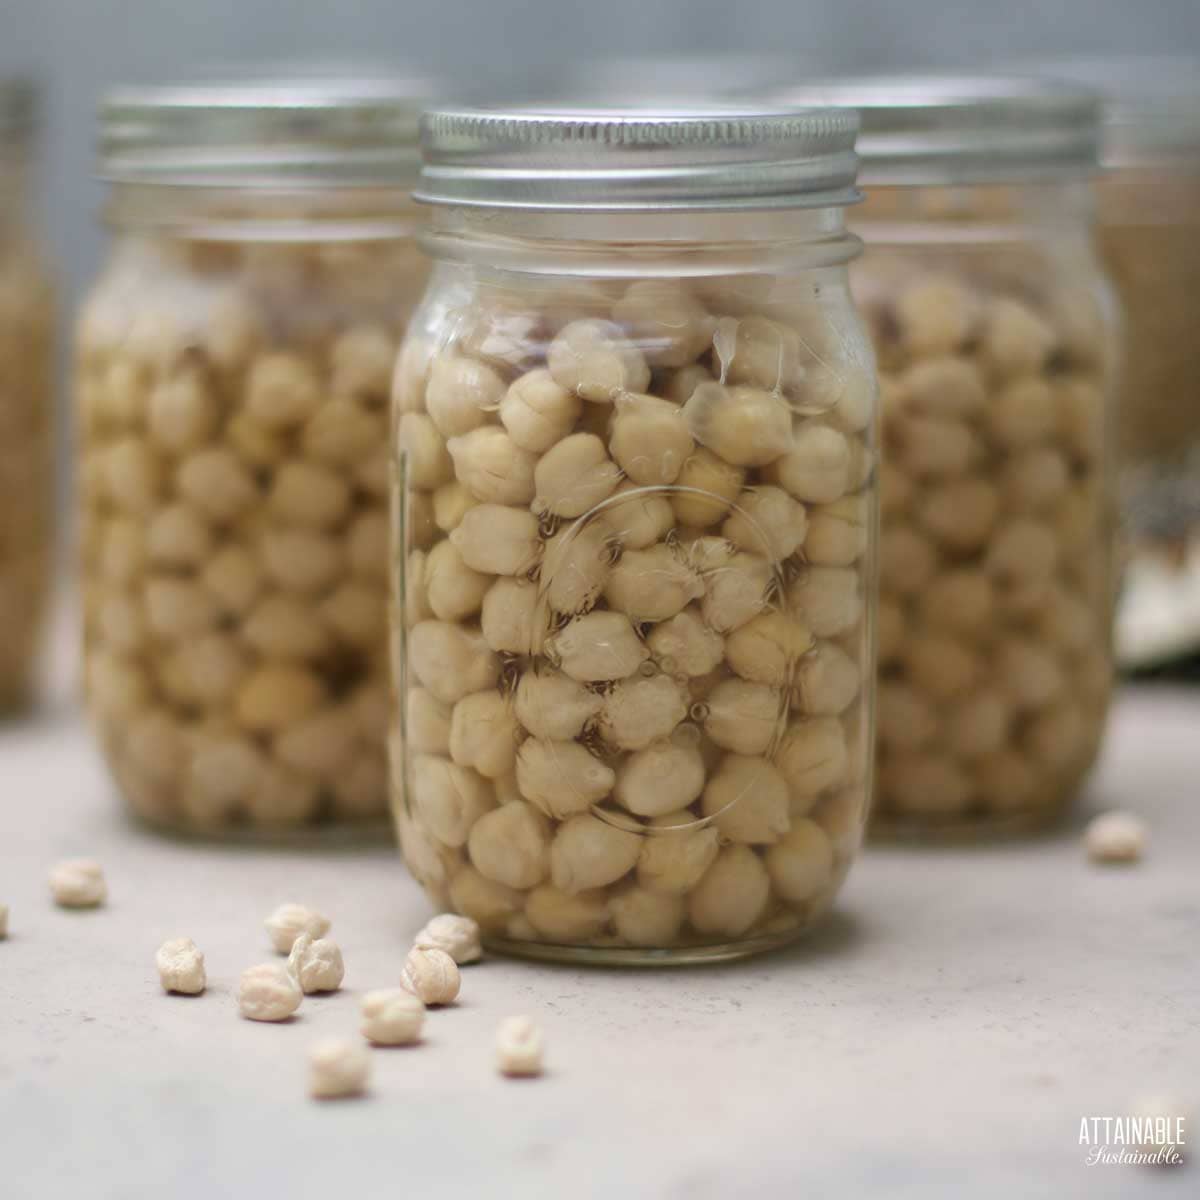 https://www.attainable-sustainable.net/wp-content/uploads/2022/08/canning-beans.jpg